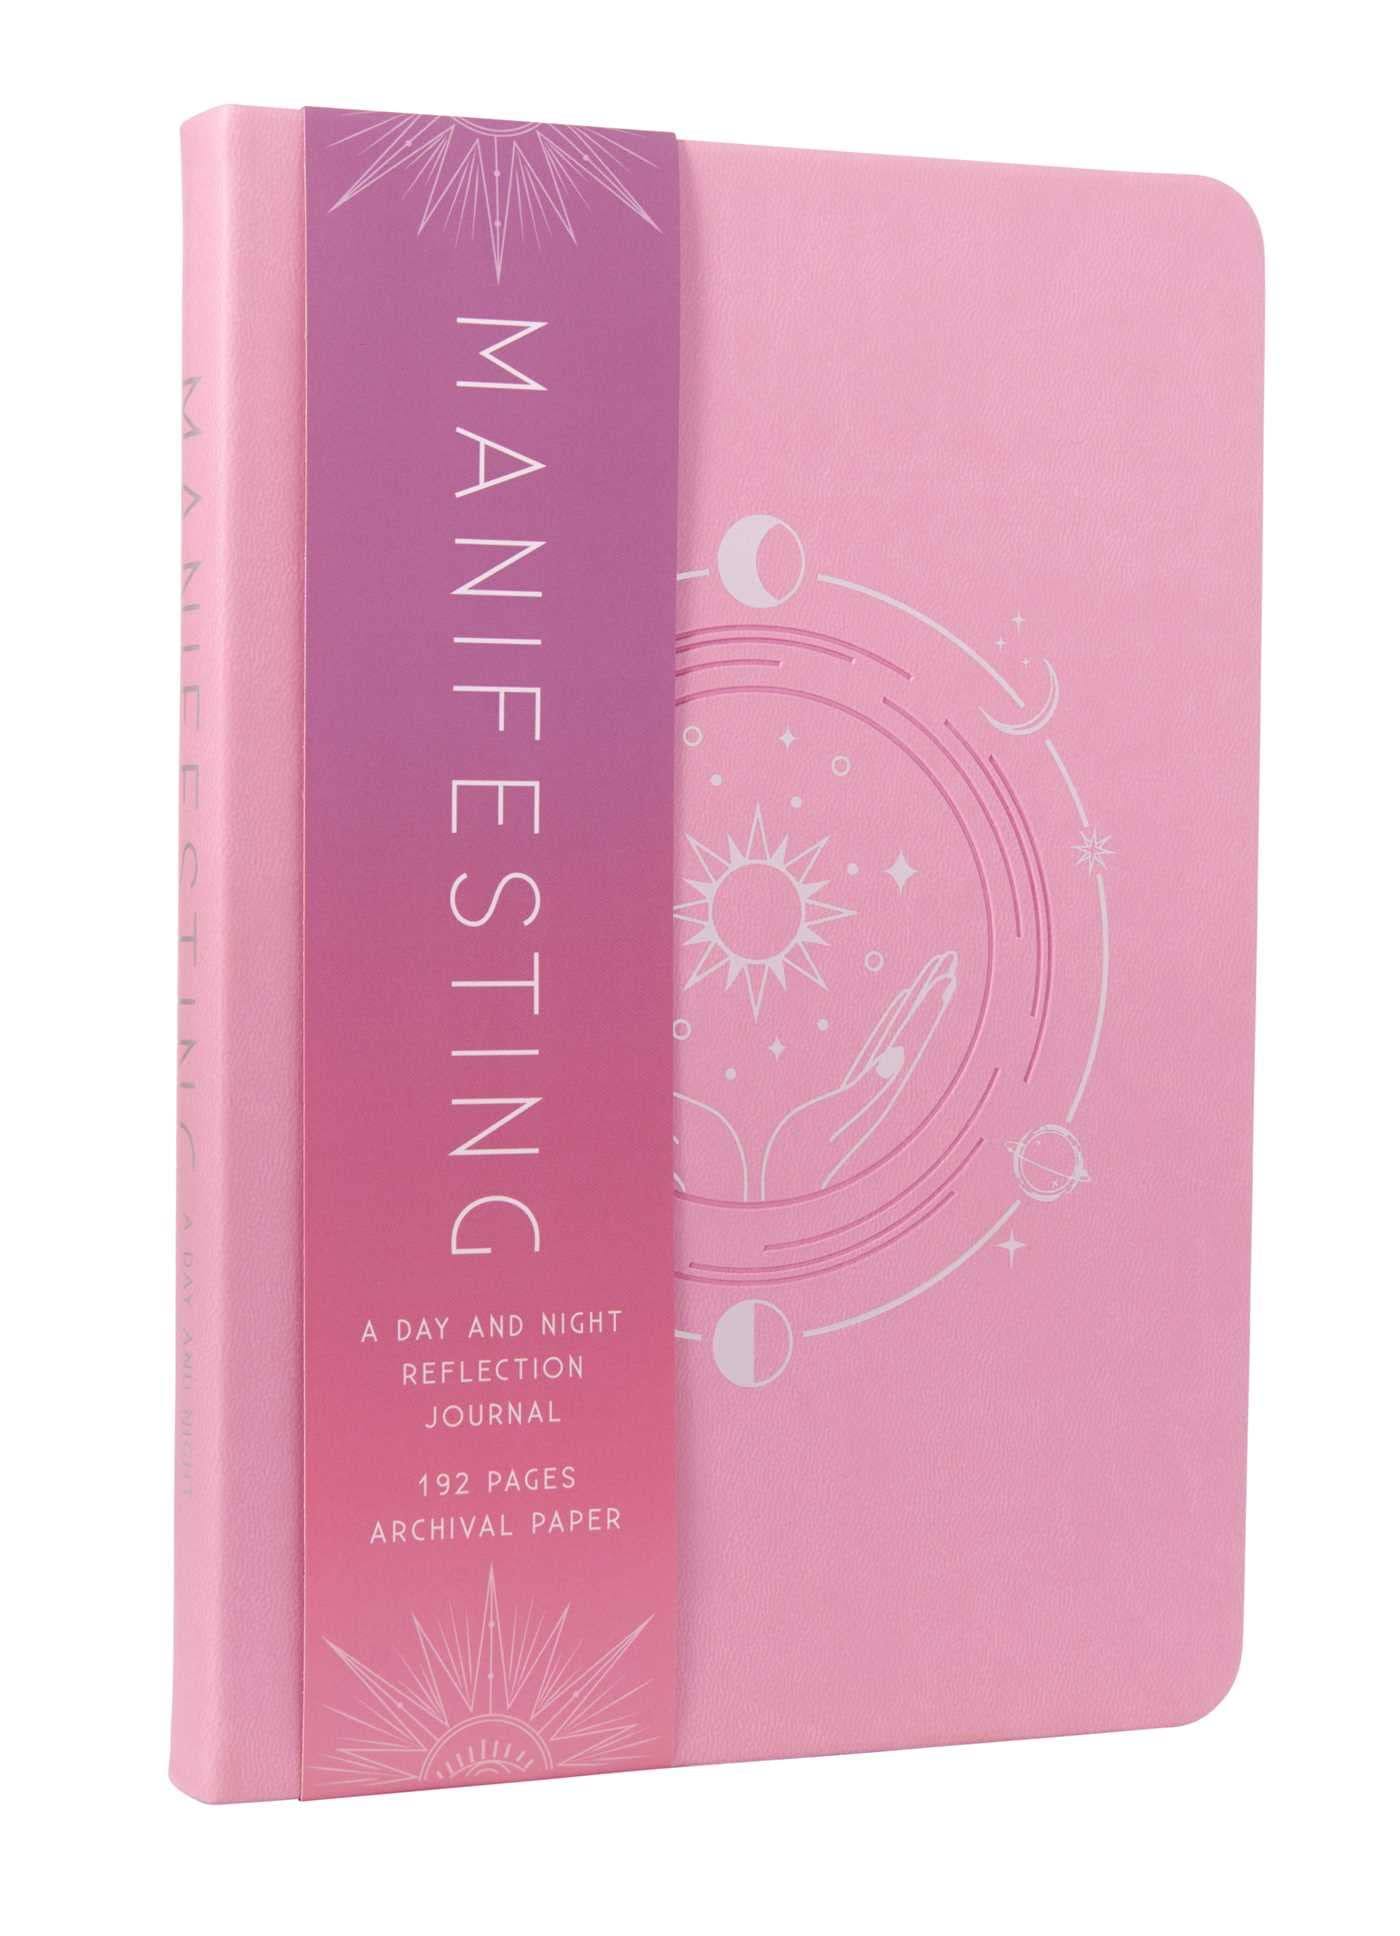 Manifesting: A Day and Night Reflection Journal [Book]